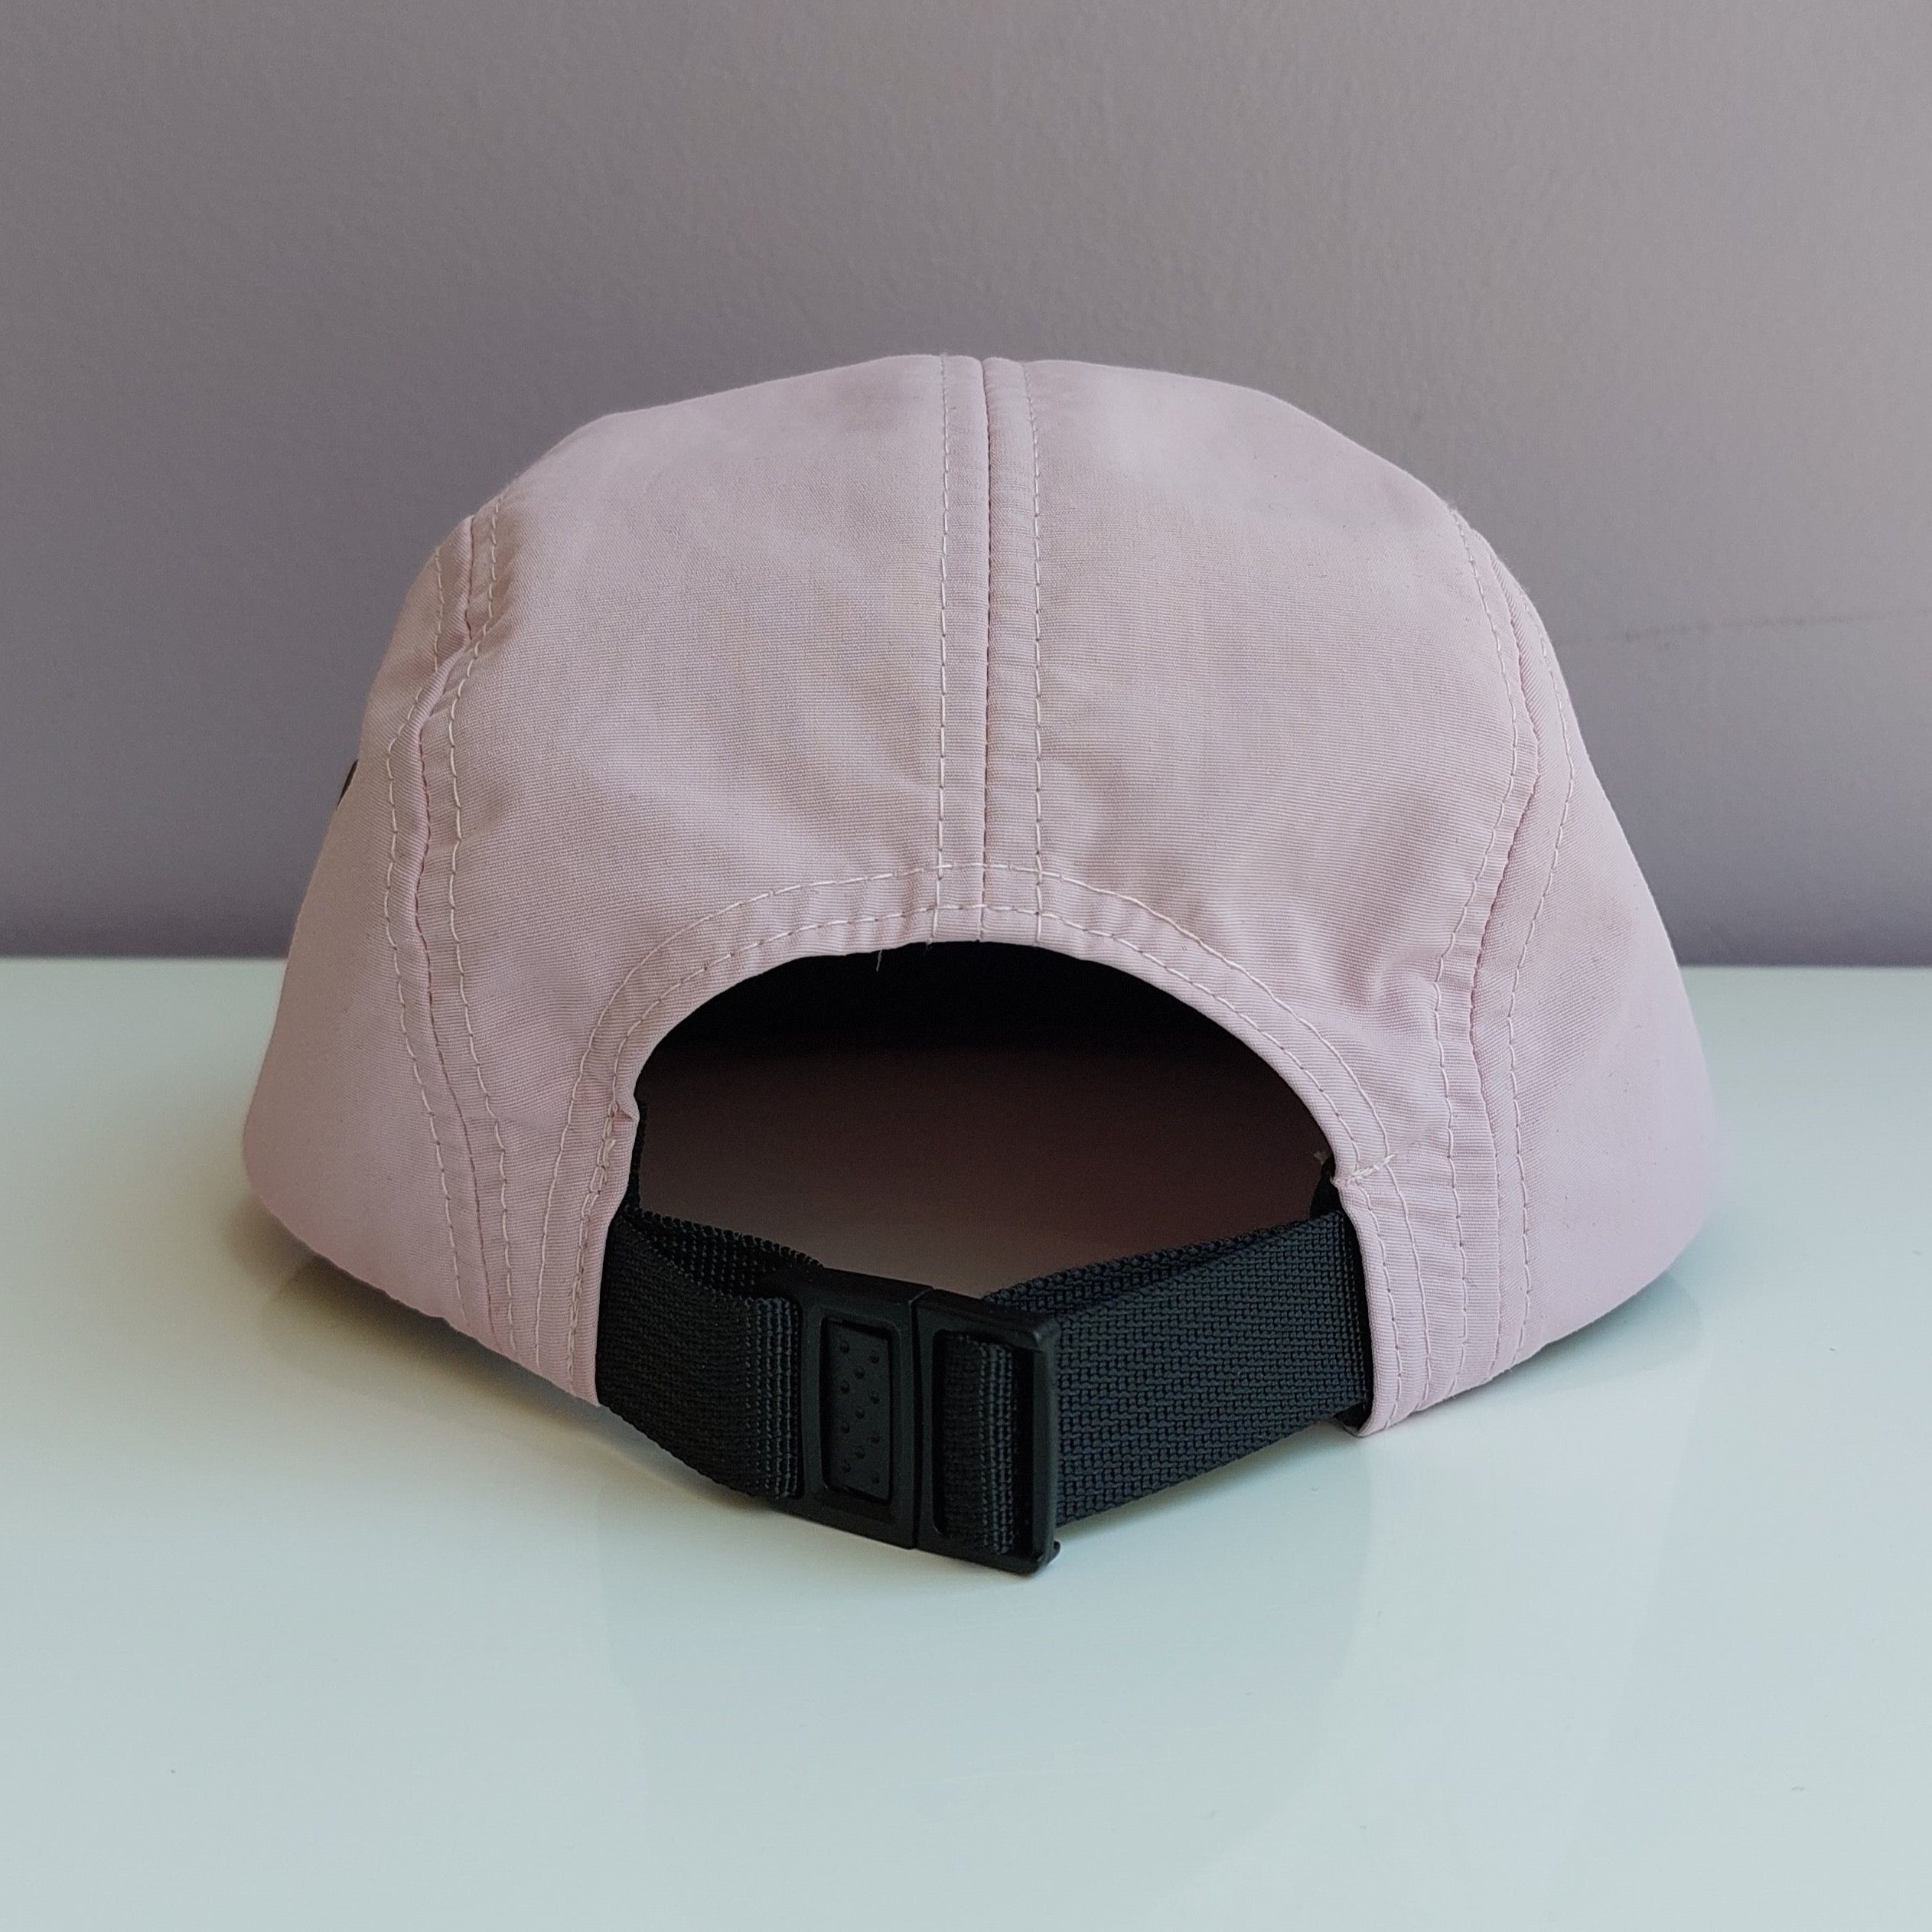 A back view of a pale pink 5 panel cap with a black adjustable strap sitting on a white surface with a light purple background.